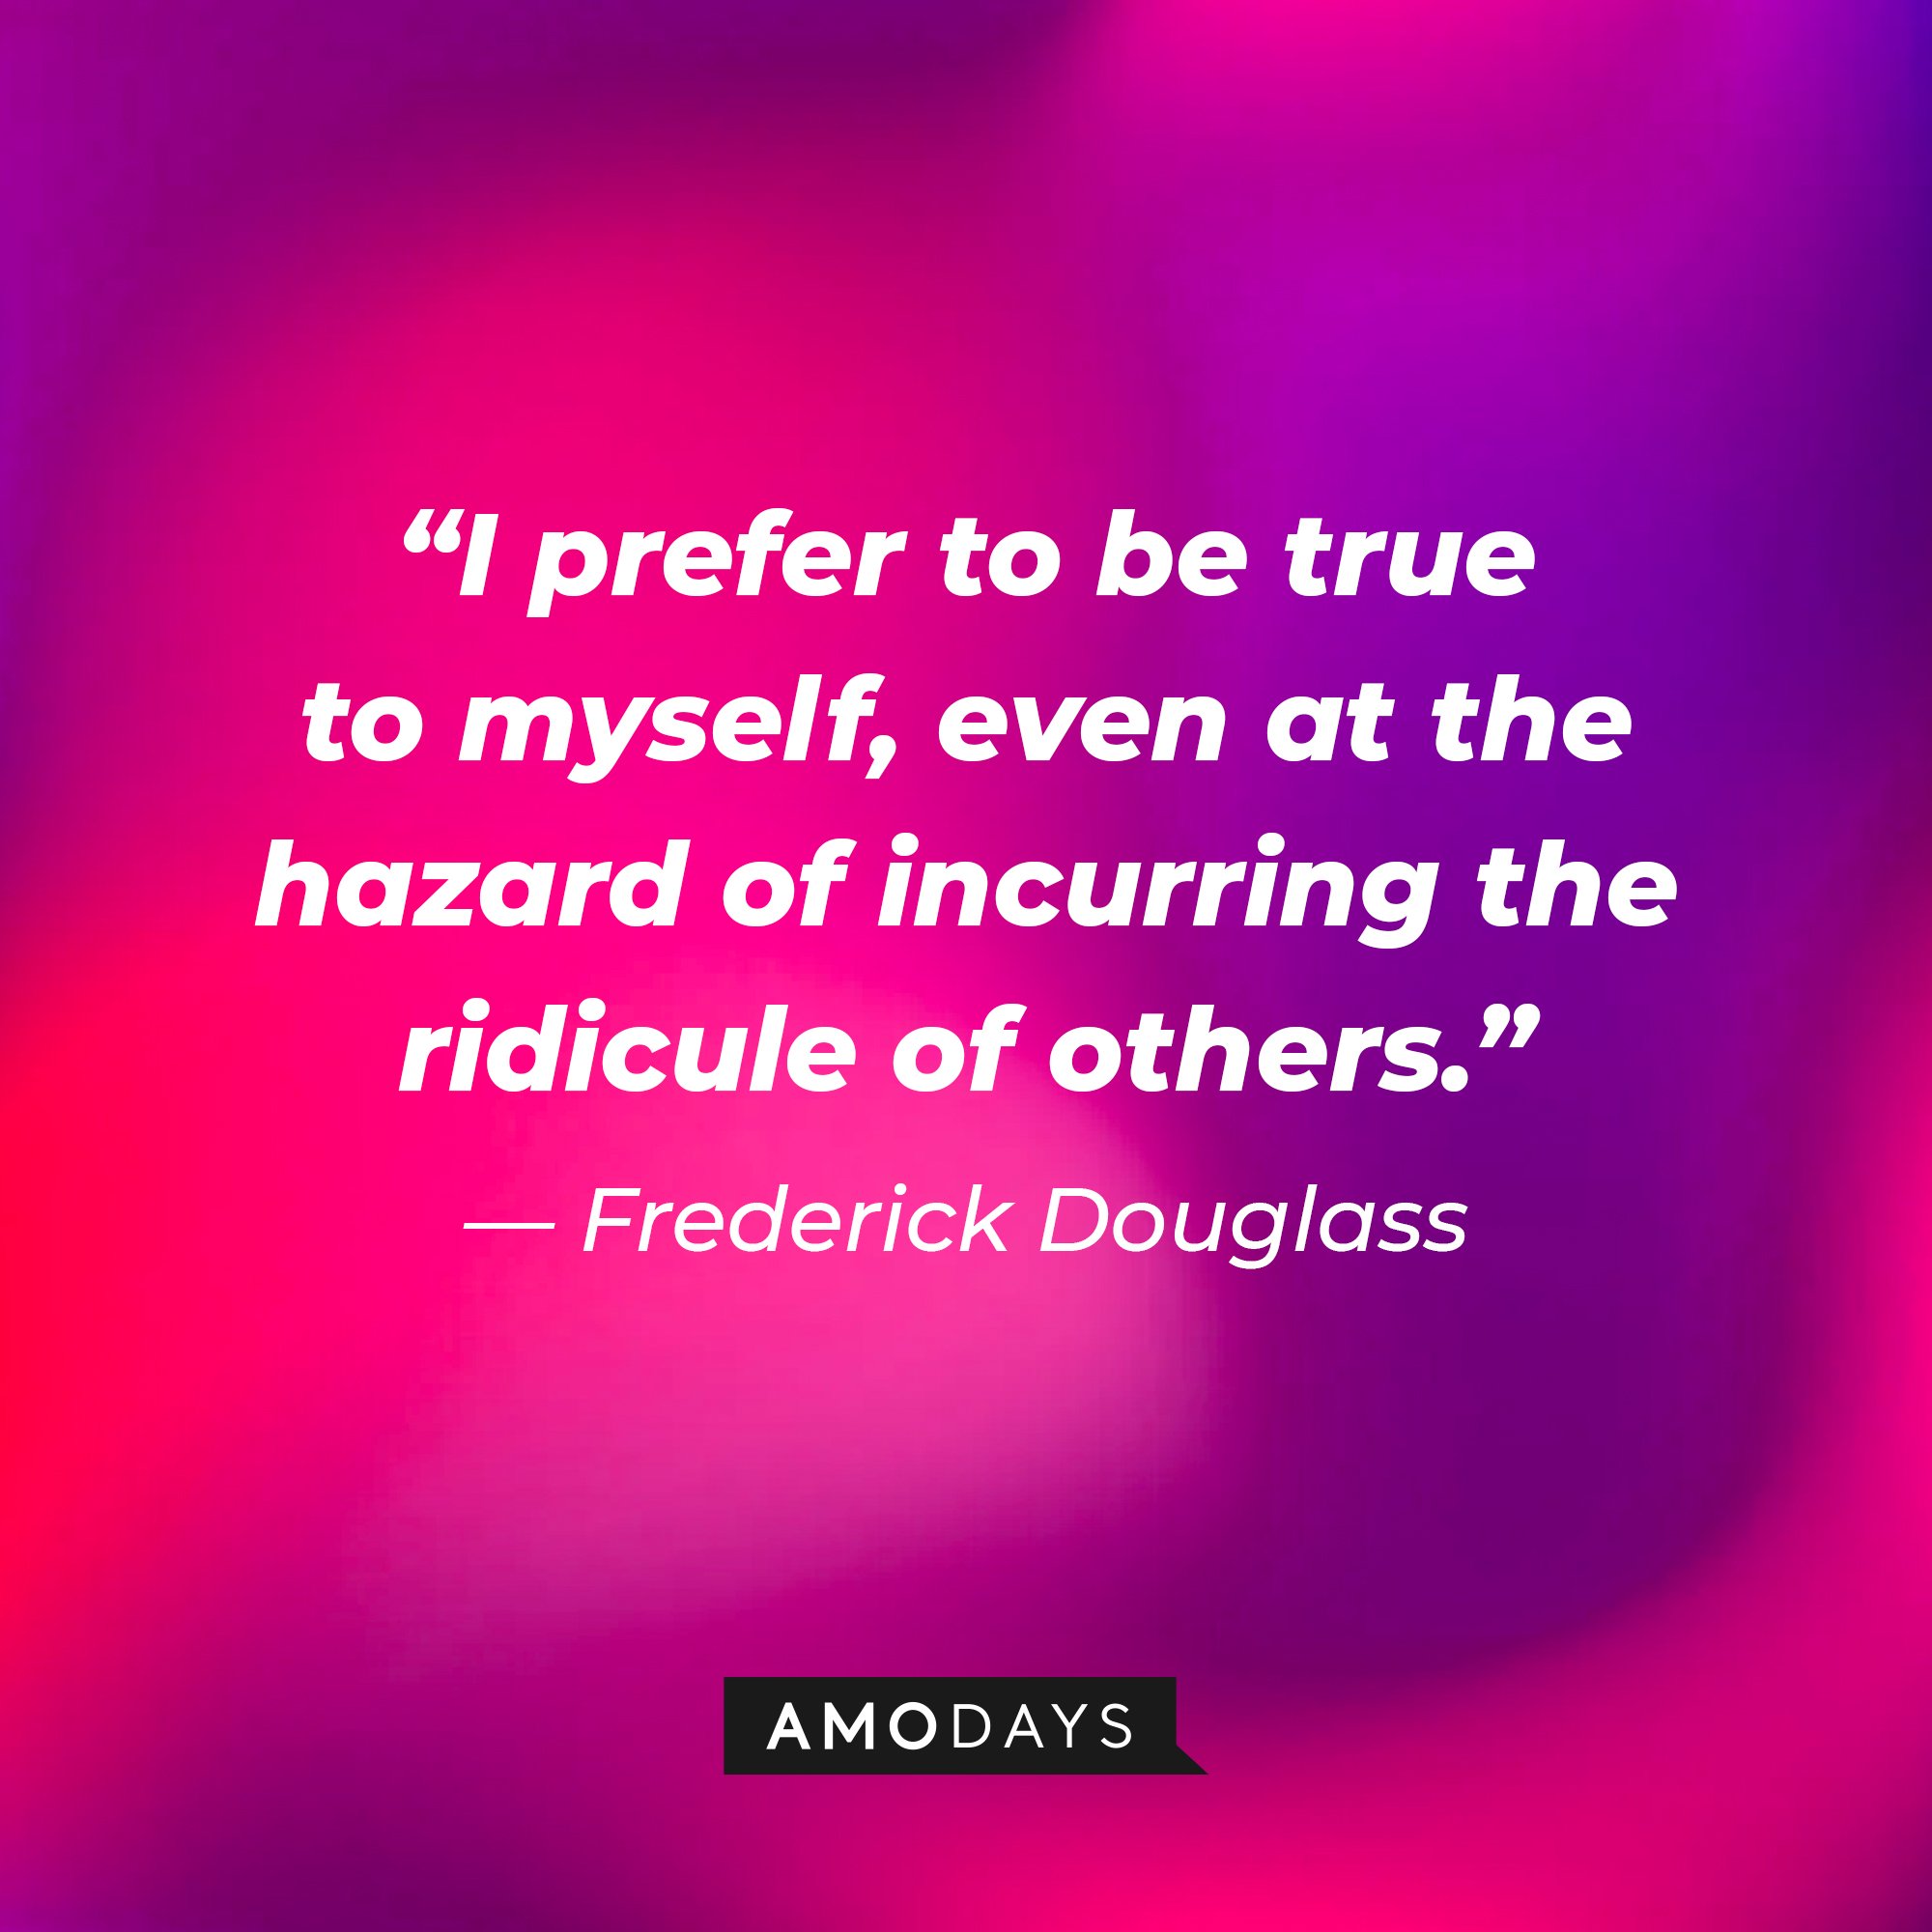 Frederick Douglass’ quote: “I prefer to be true to myself, even at the hazard of incurring the ridicule of others.” | Image: AmoDays